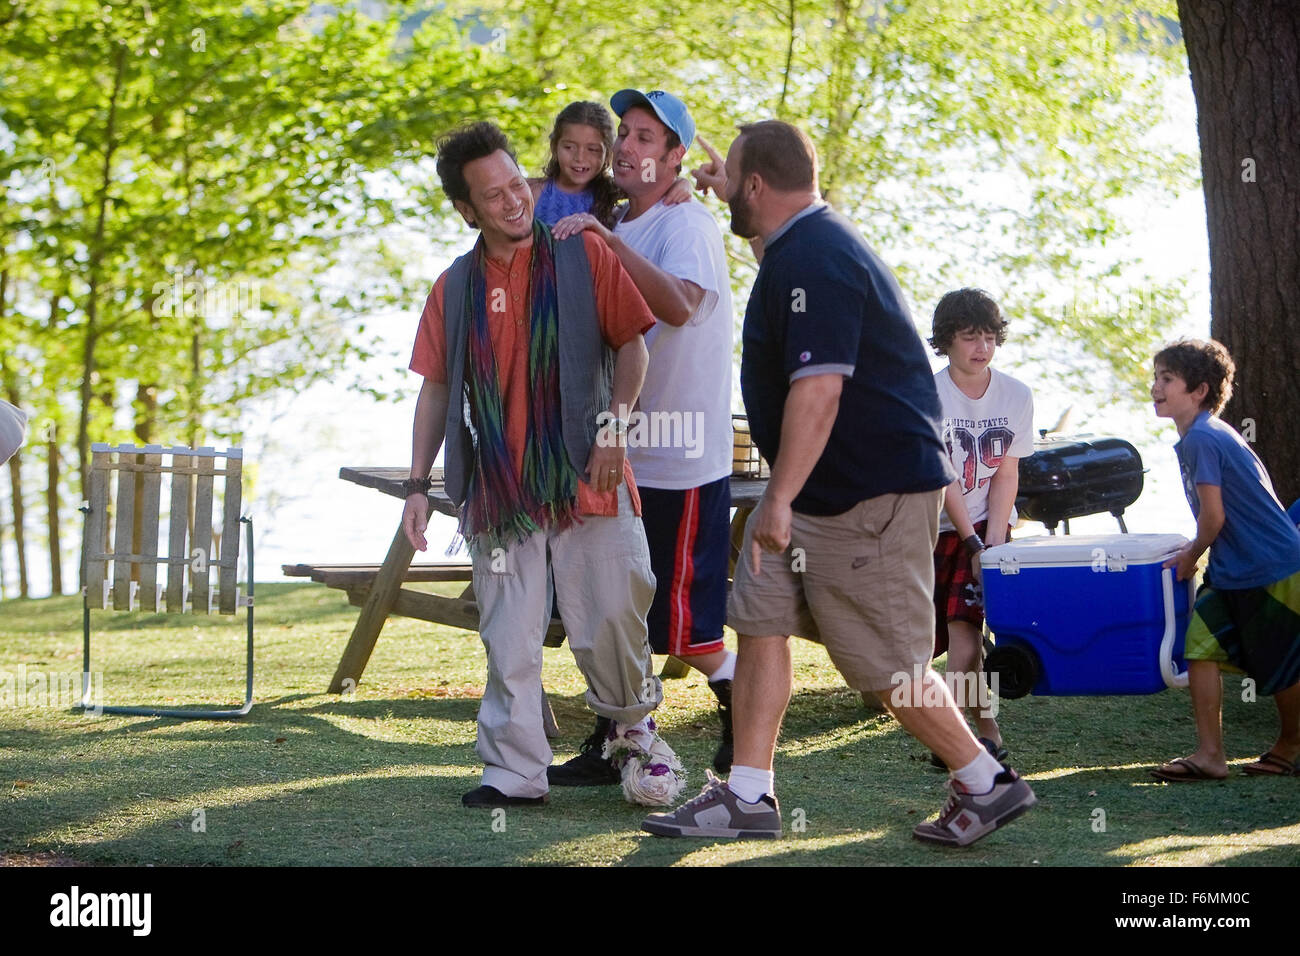 RELEASE DATE: June 25, 2010. MOVIE TITLE: Grown Ups. STUDIO: Columbia Pictures. PLOT: Thirty years after their high school graduation, five good friends reunite for a Fourth of July holiday weekend. PICTURED: ROB SCHNEIDER as Rob Hilliard with ADAM SANDLER as Lenny Feder and KEVIN JAMES as Eric Lamonsoff. Stock Photo